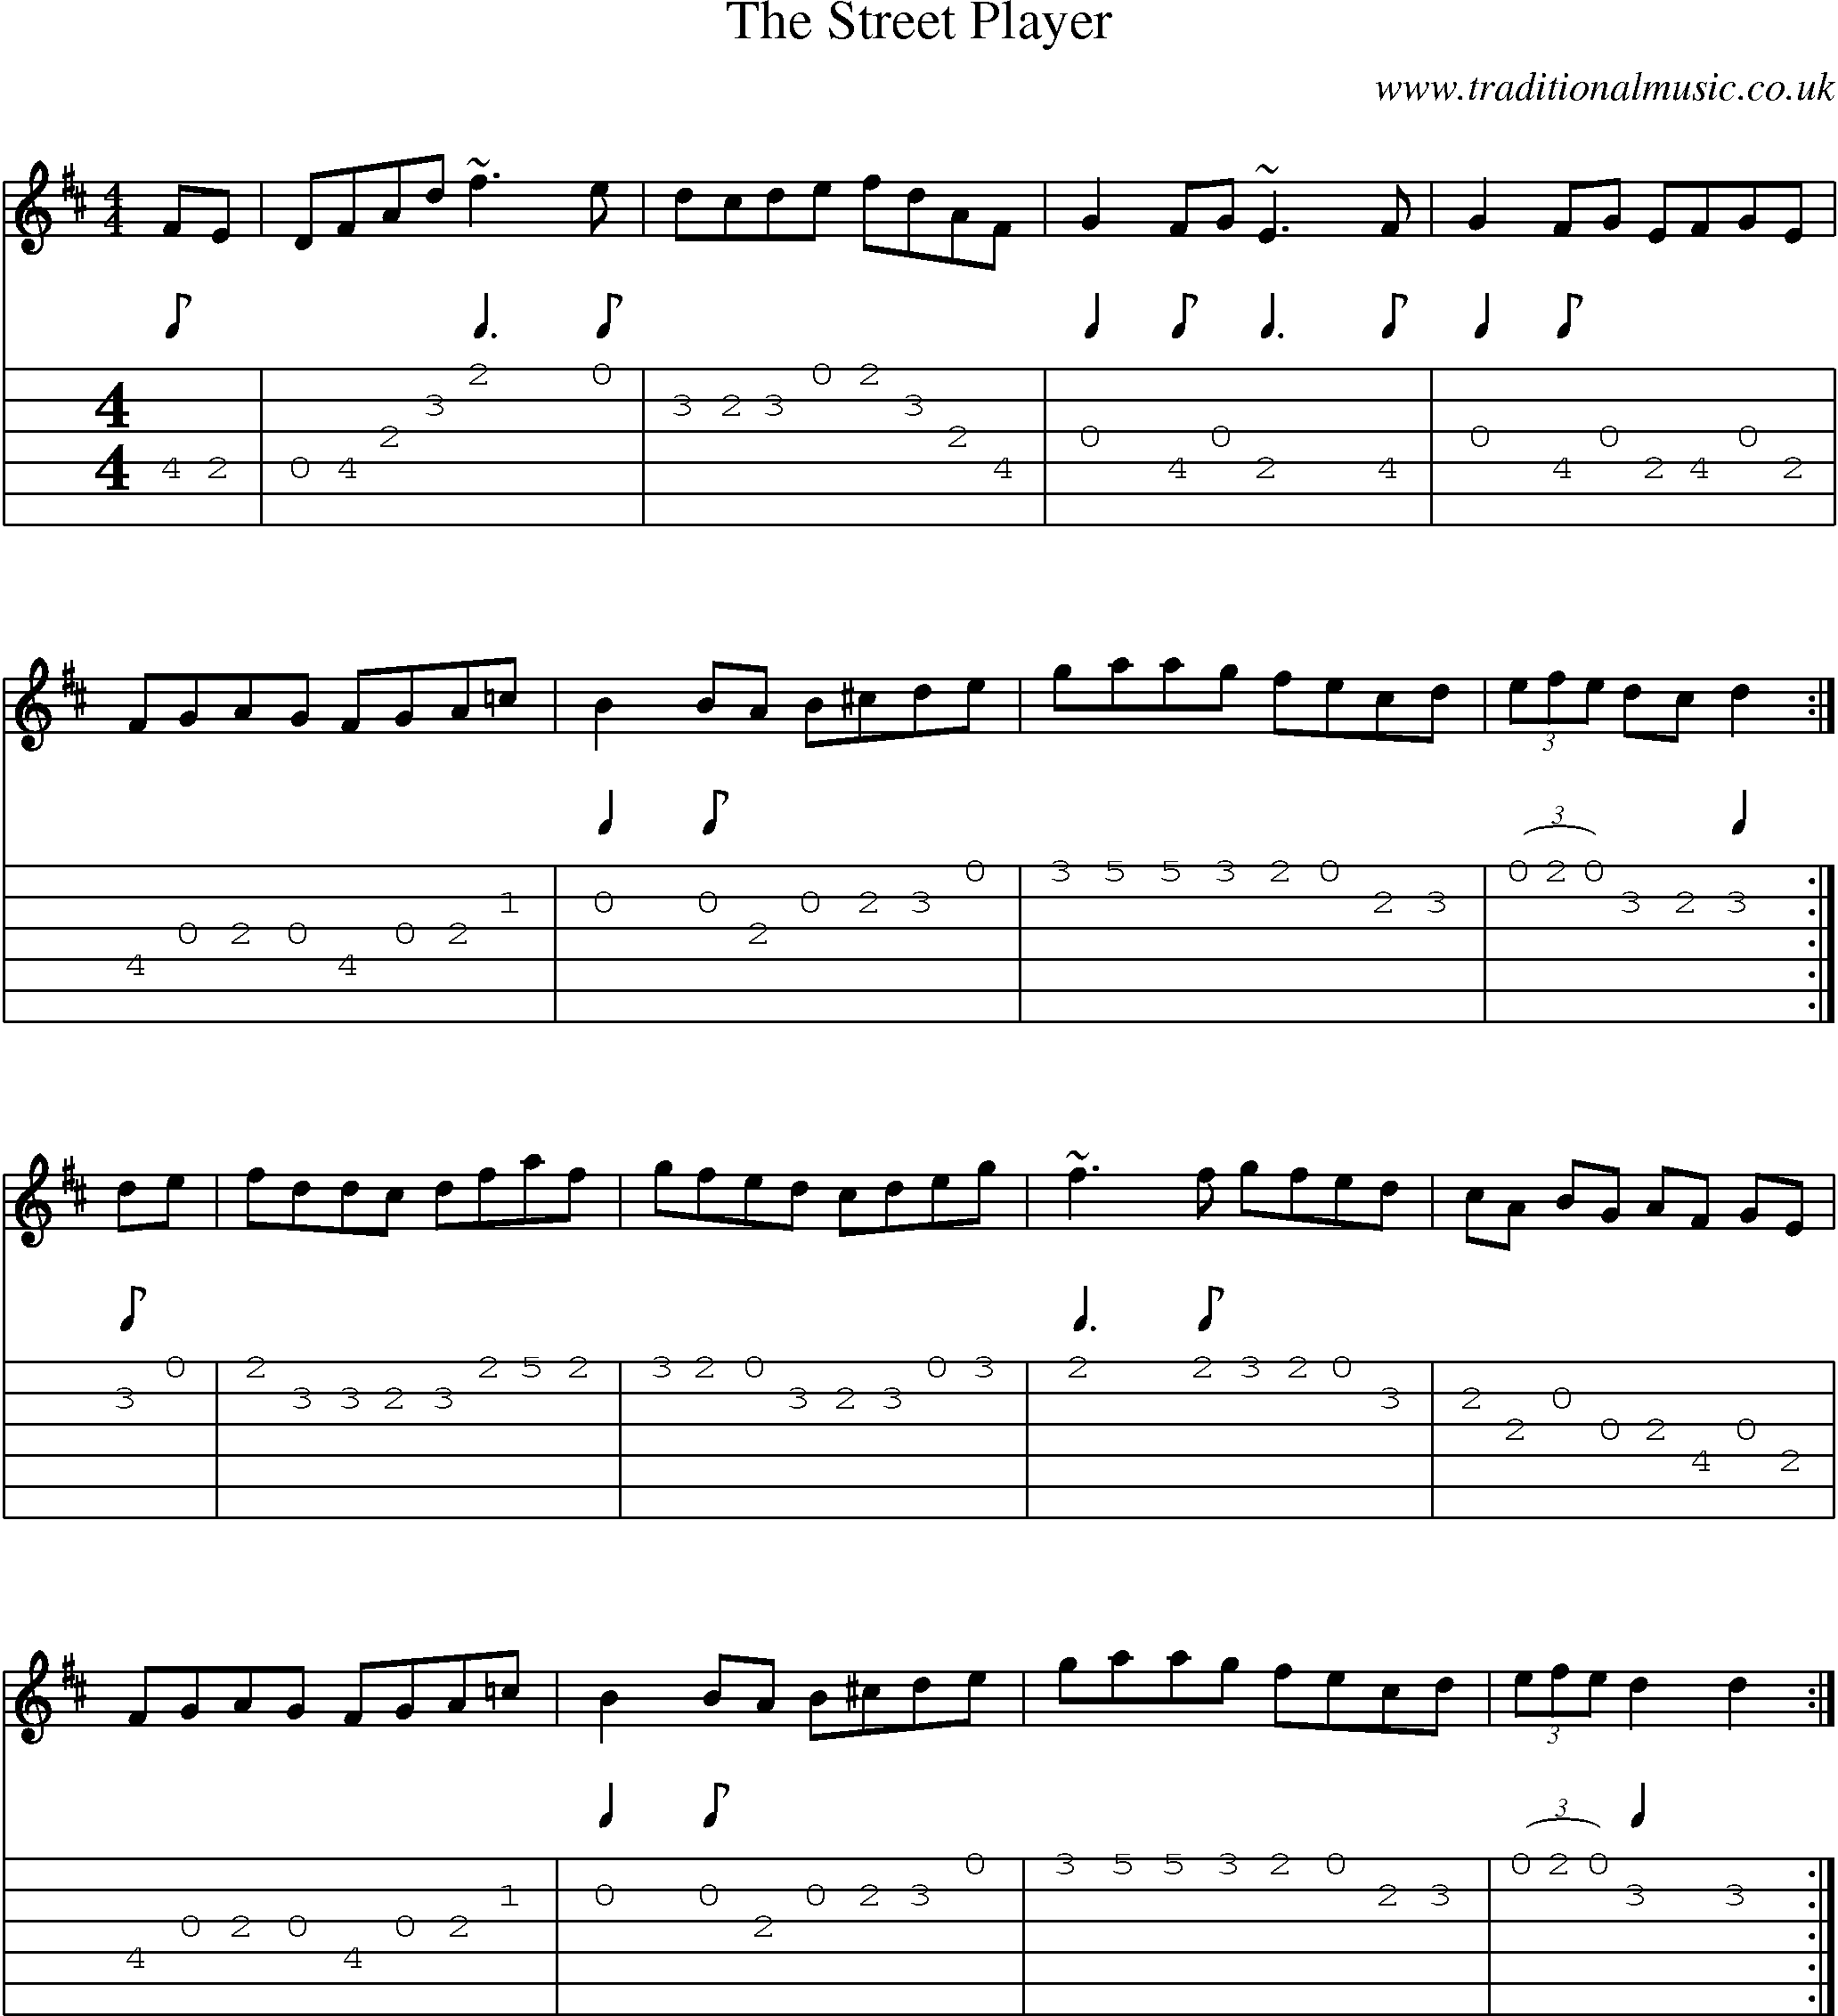 Music Score and Guitar Tabs for The Street Player